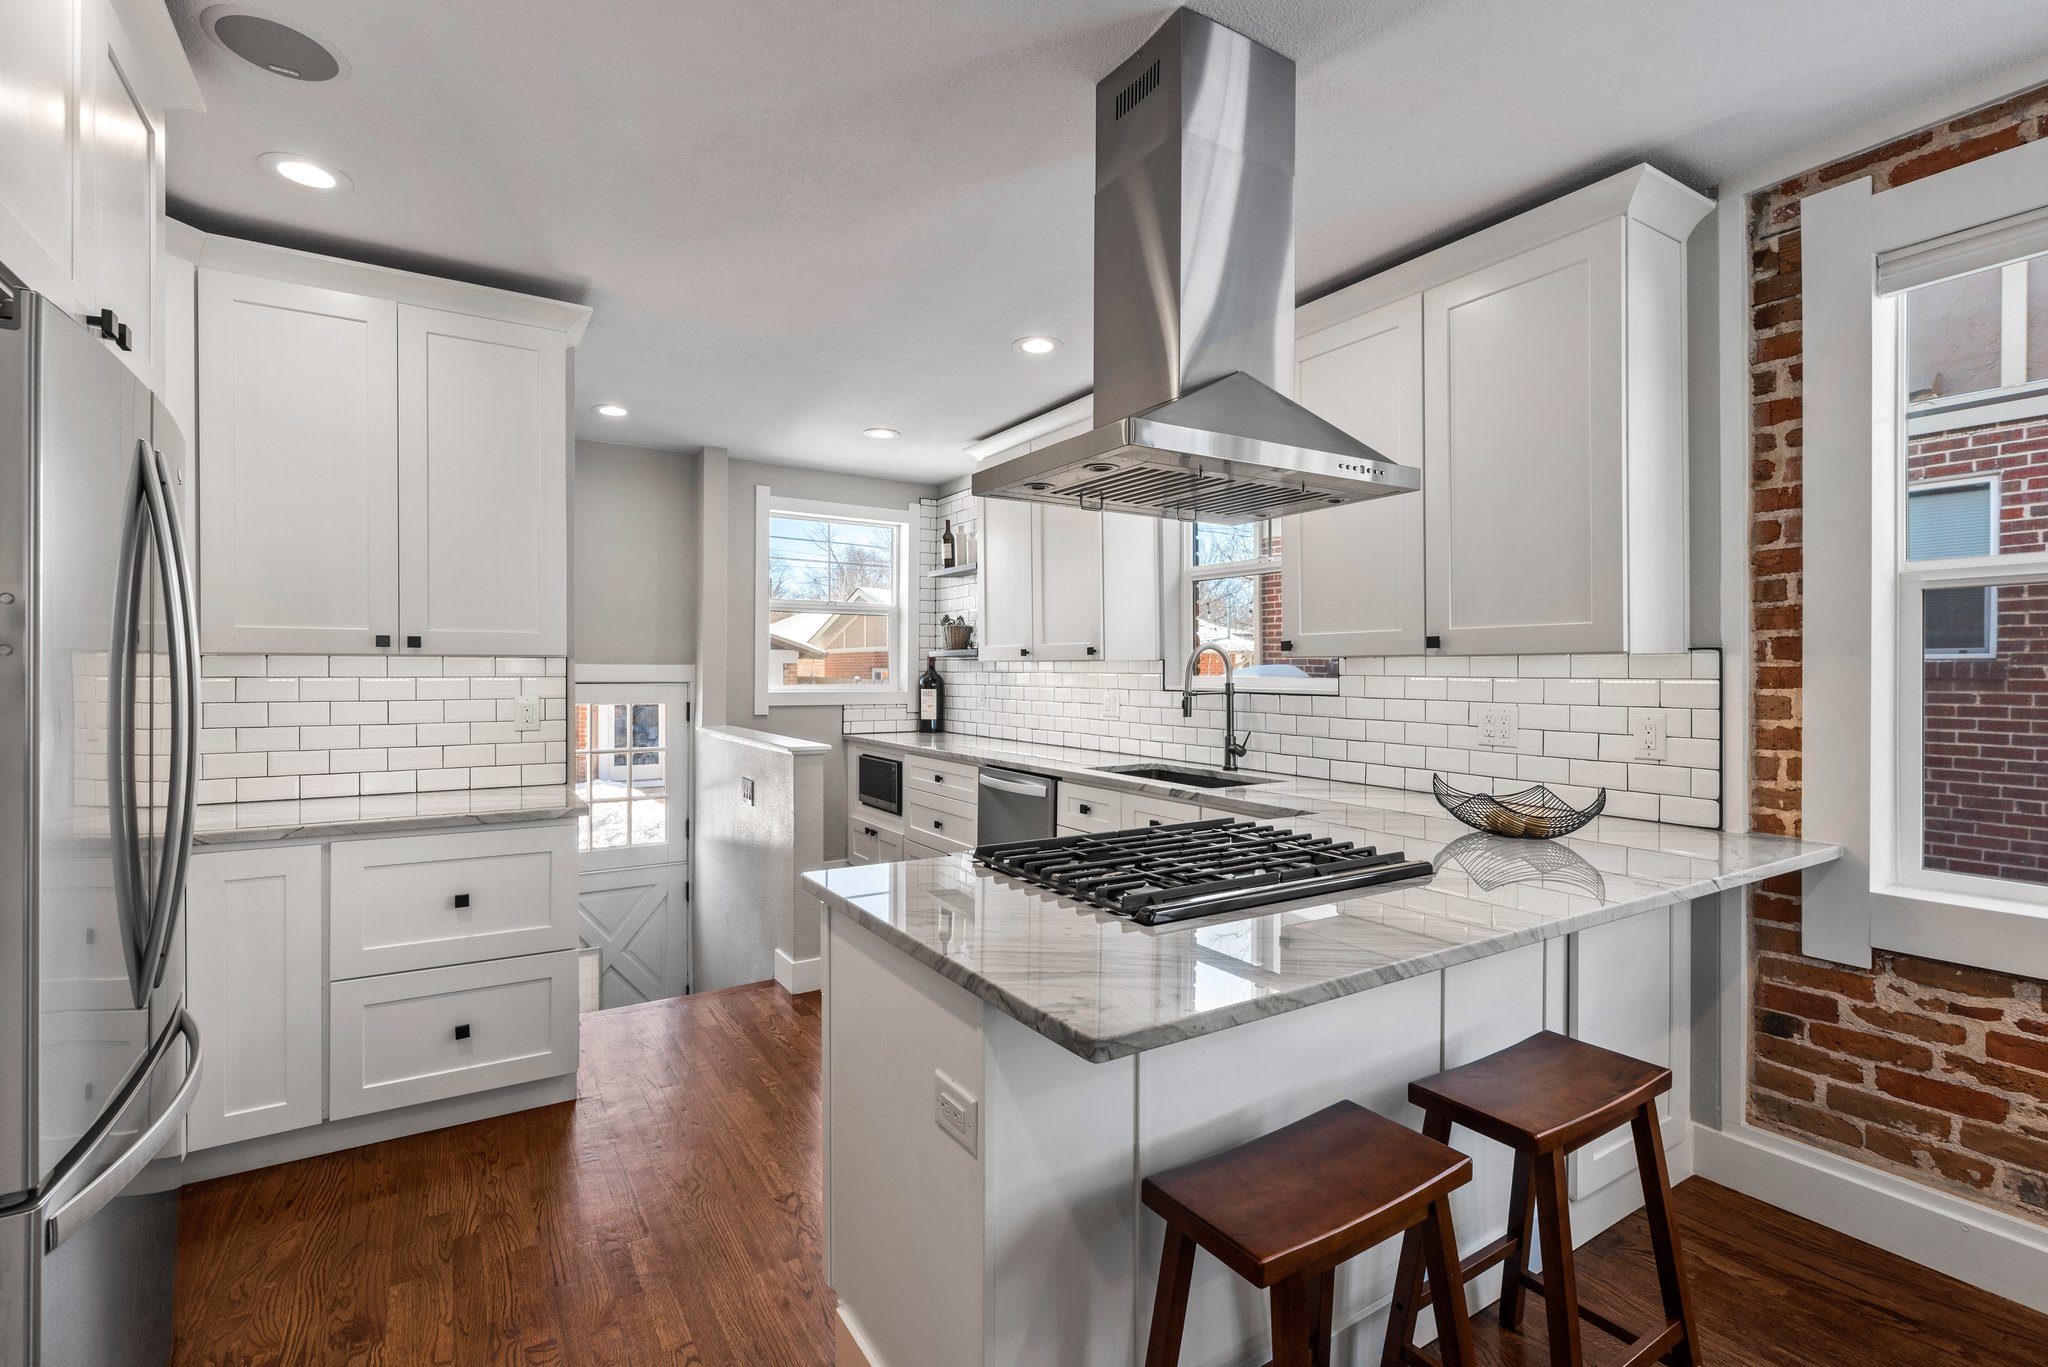 The Newly Remodeled Kitchen was Designed with Function and Sophistication